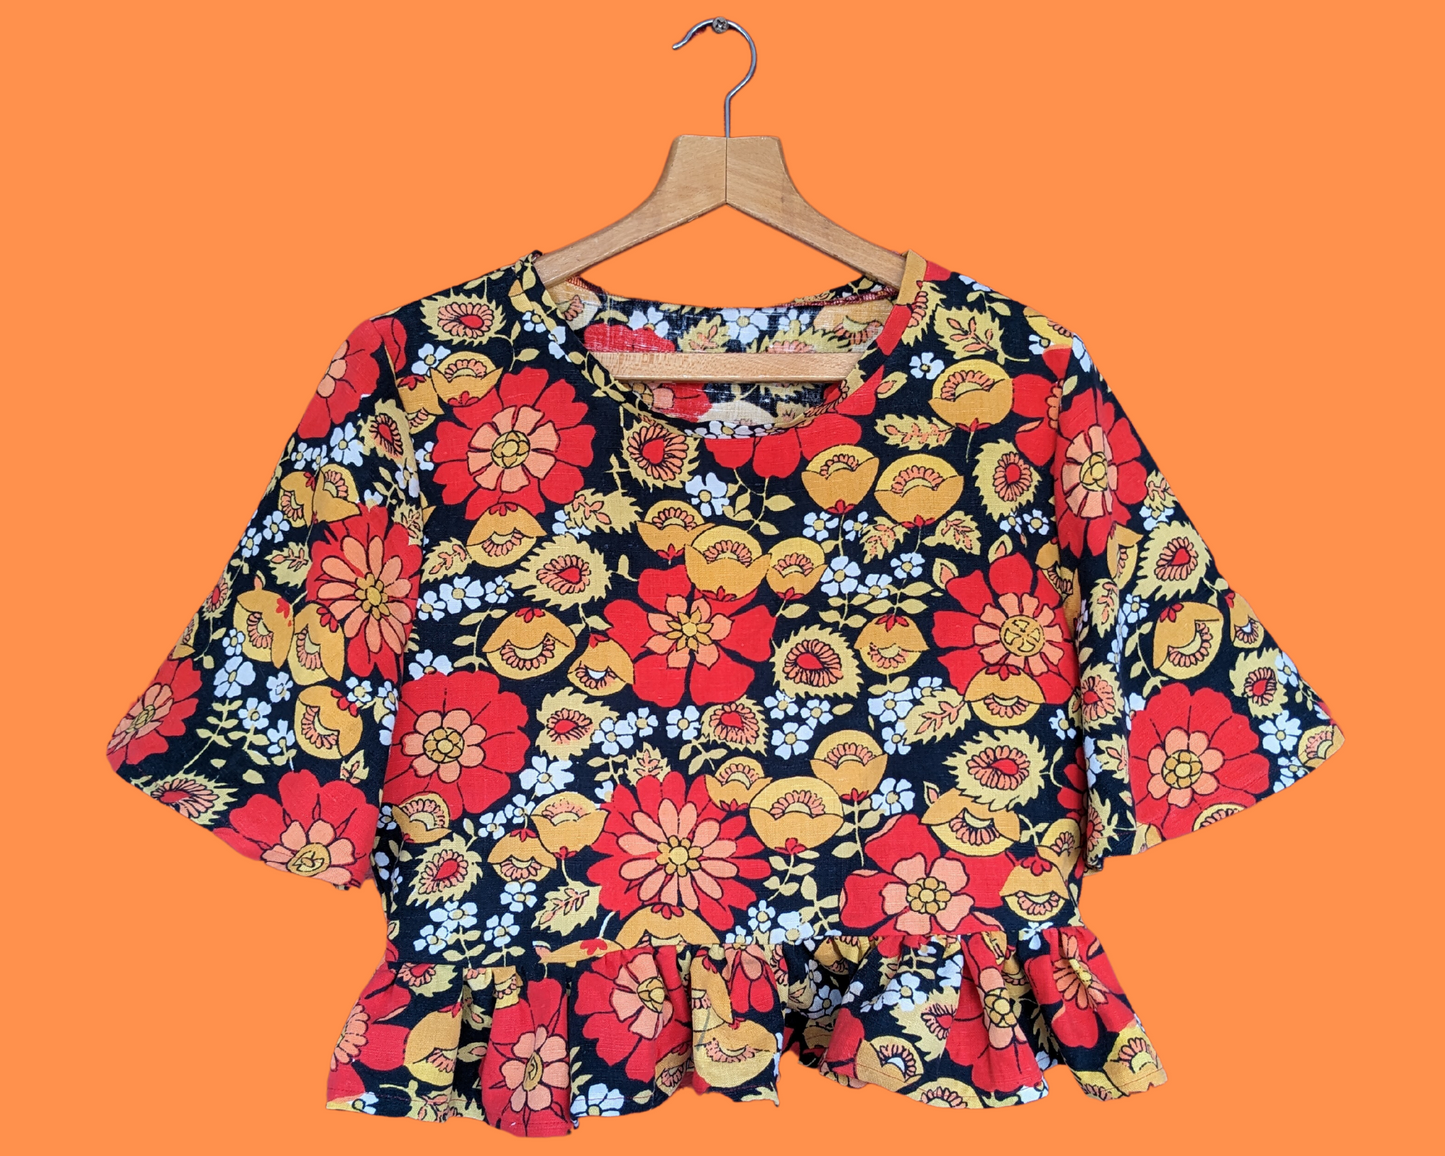 Handmade, Upcycled Vintage 1960's Floral Mod, Groovy Blouse Size M